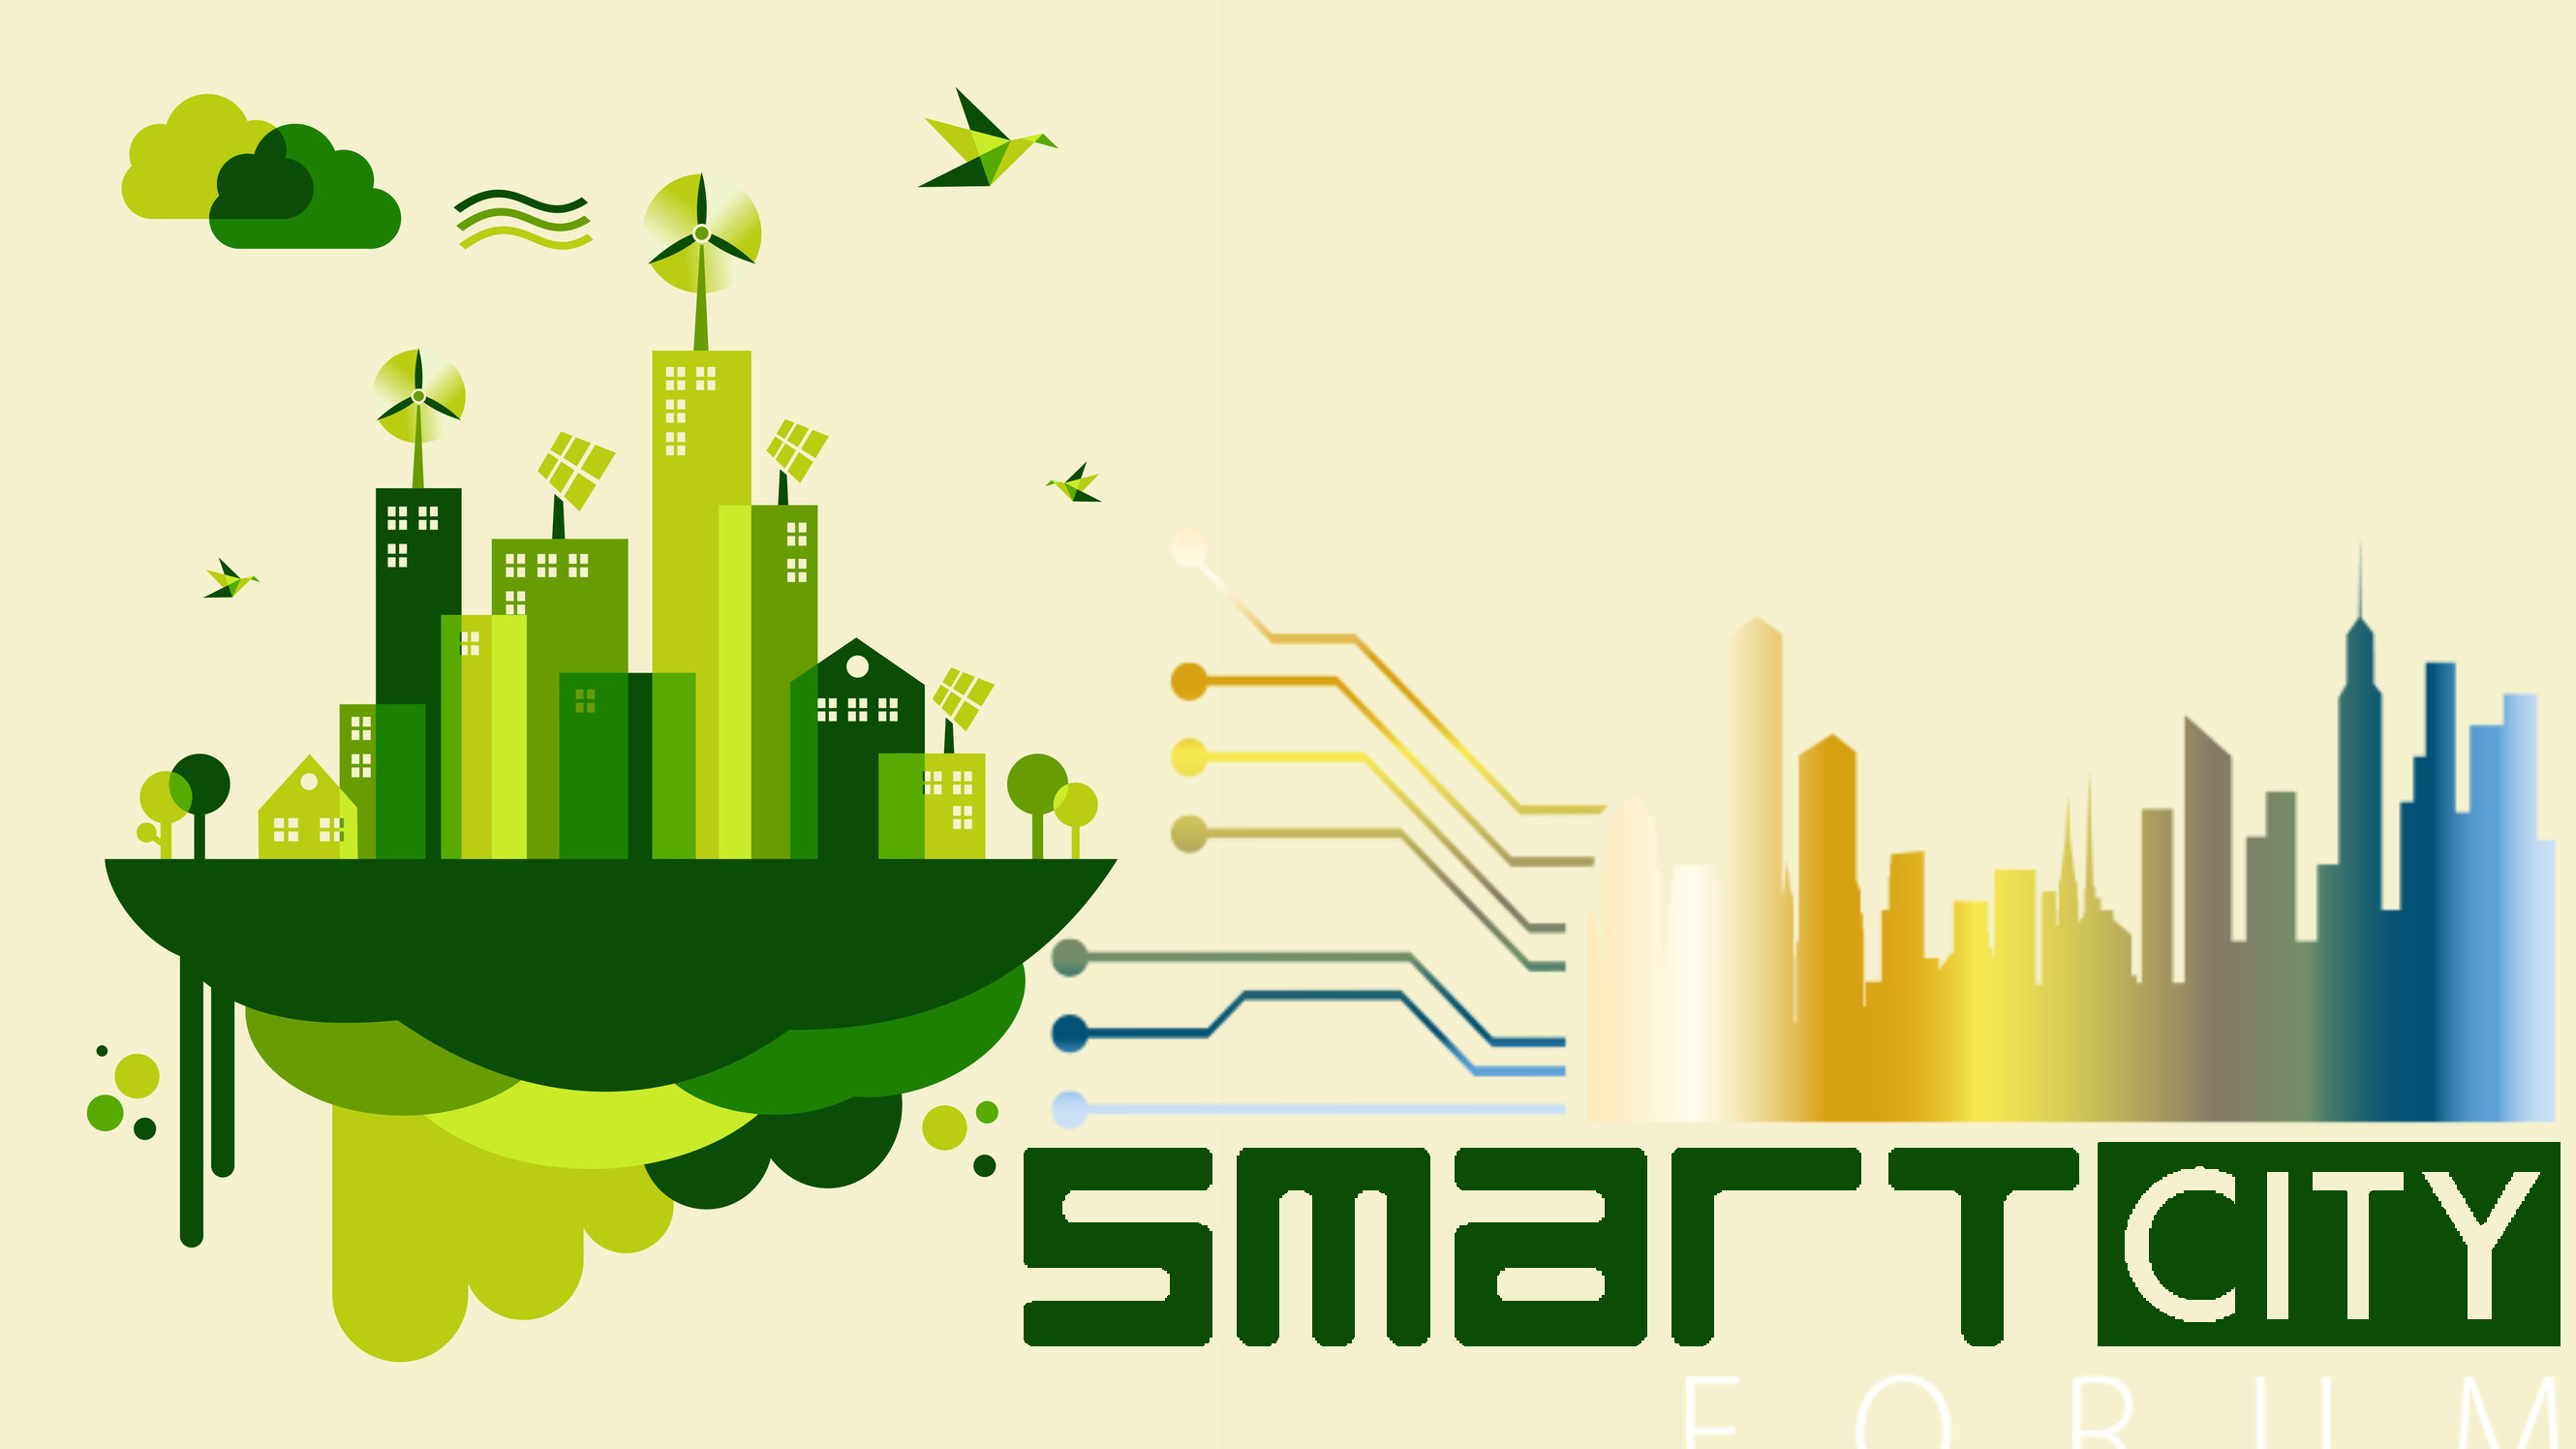 In November, the Digital Economy Development Fund will hold Smart City Forum 2019 in Moscow